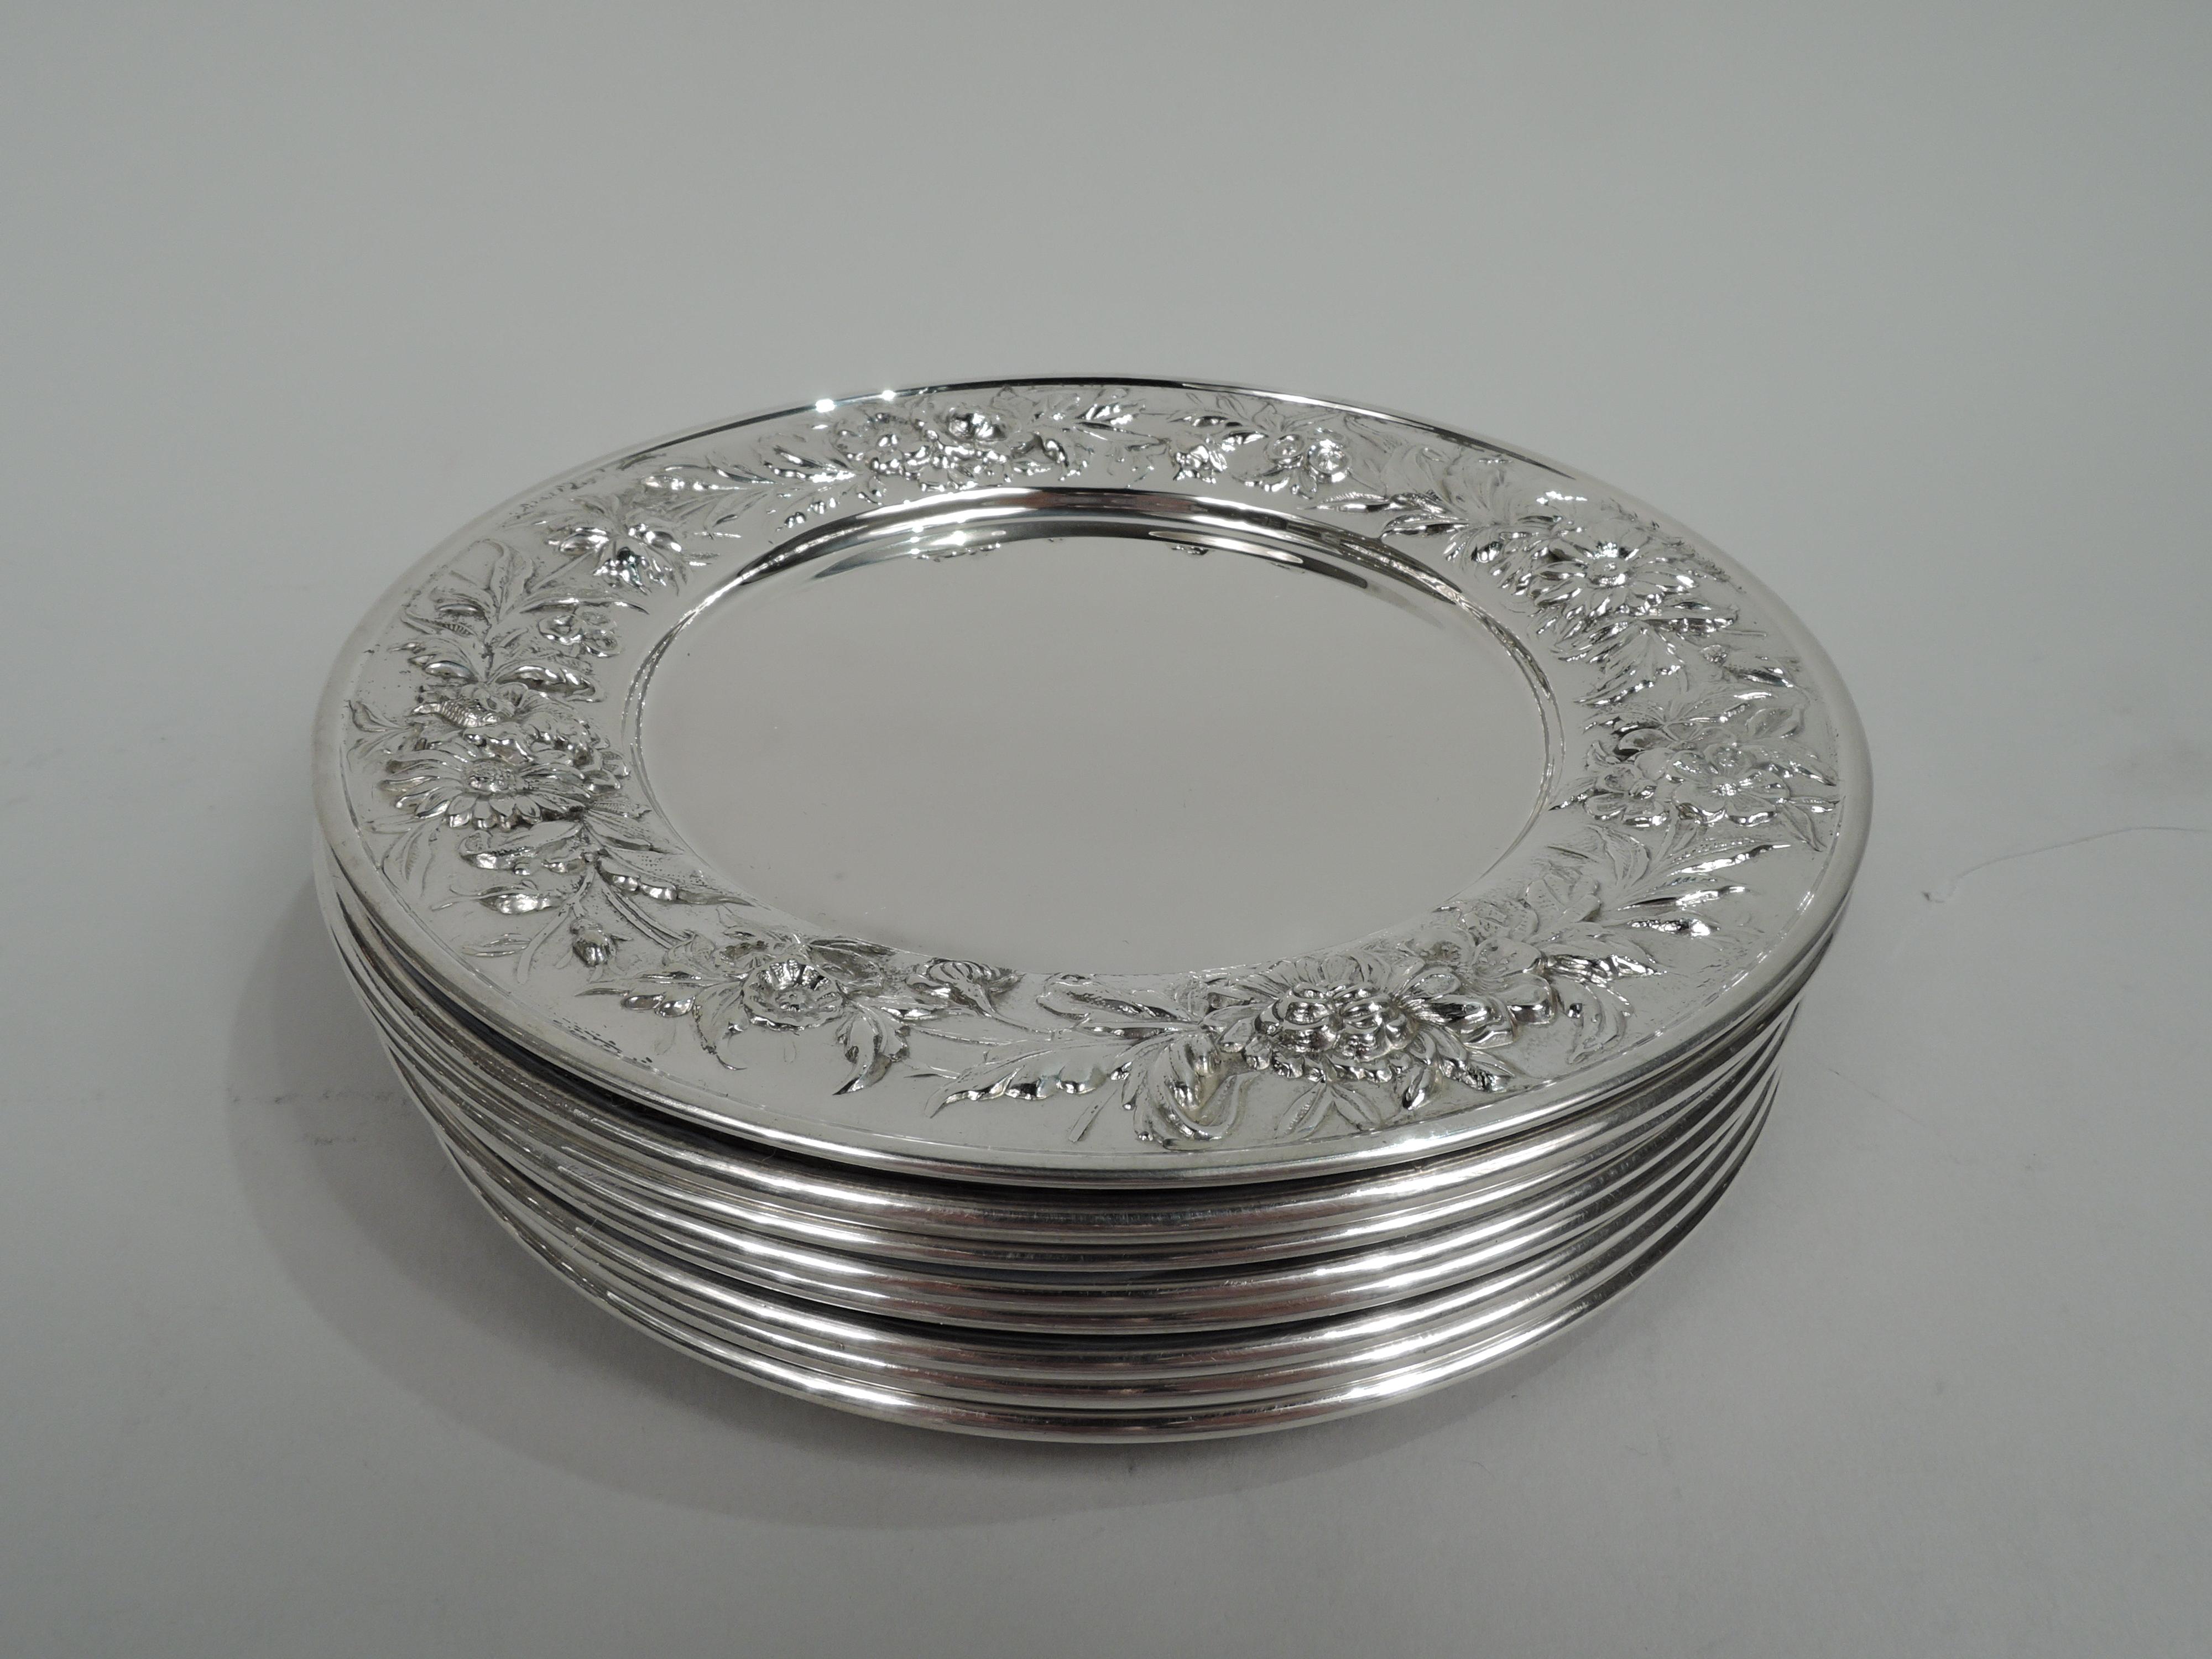 Set of 8 sterling silver bread and butter plates. Made by S. Kirk & Son in Baltimore, circa 1940. Each: Plain well; on shoulder repousse floral garland on stippled ground. Fully marked including maker’s stamp (1932-61) and no. 127F. Total weight: